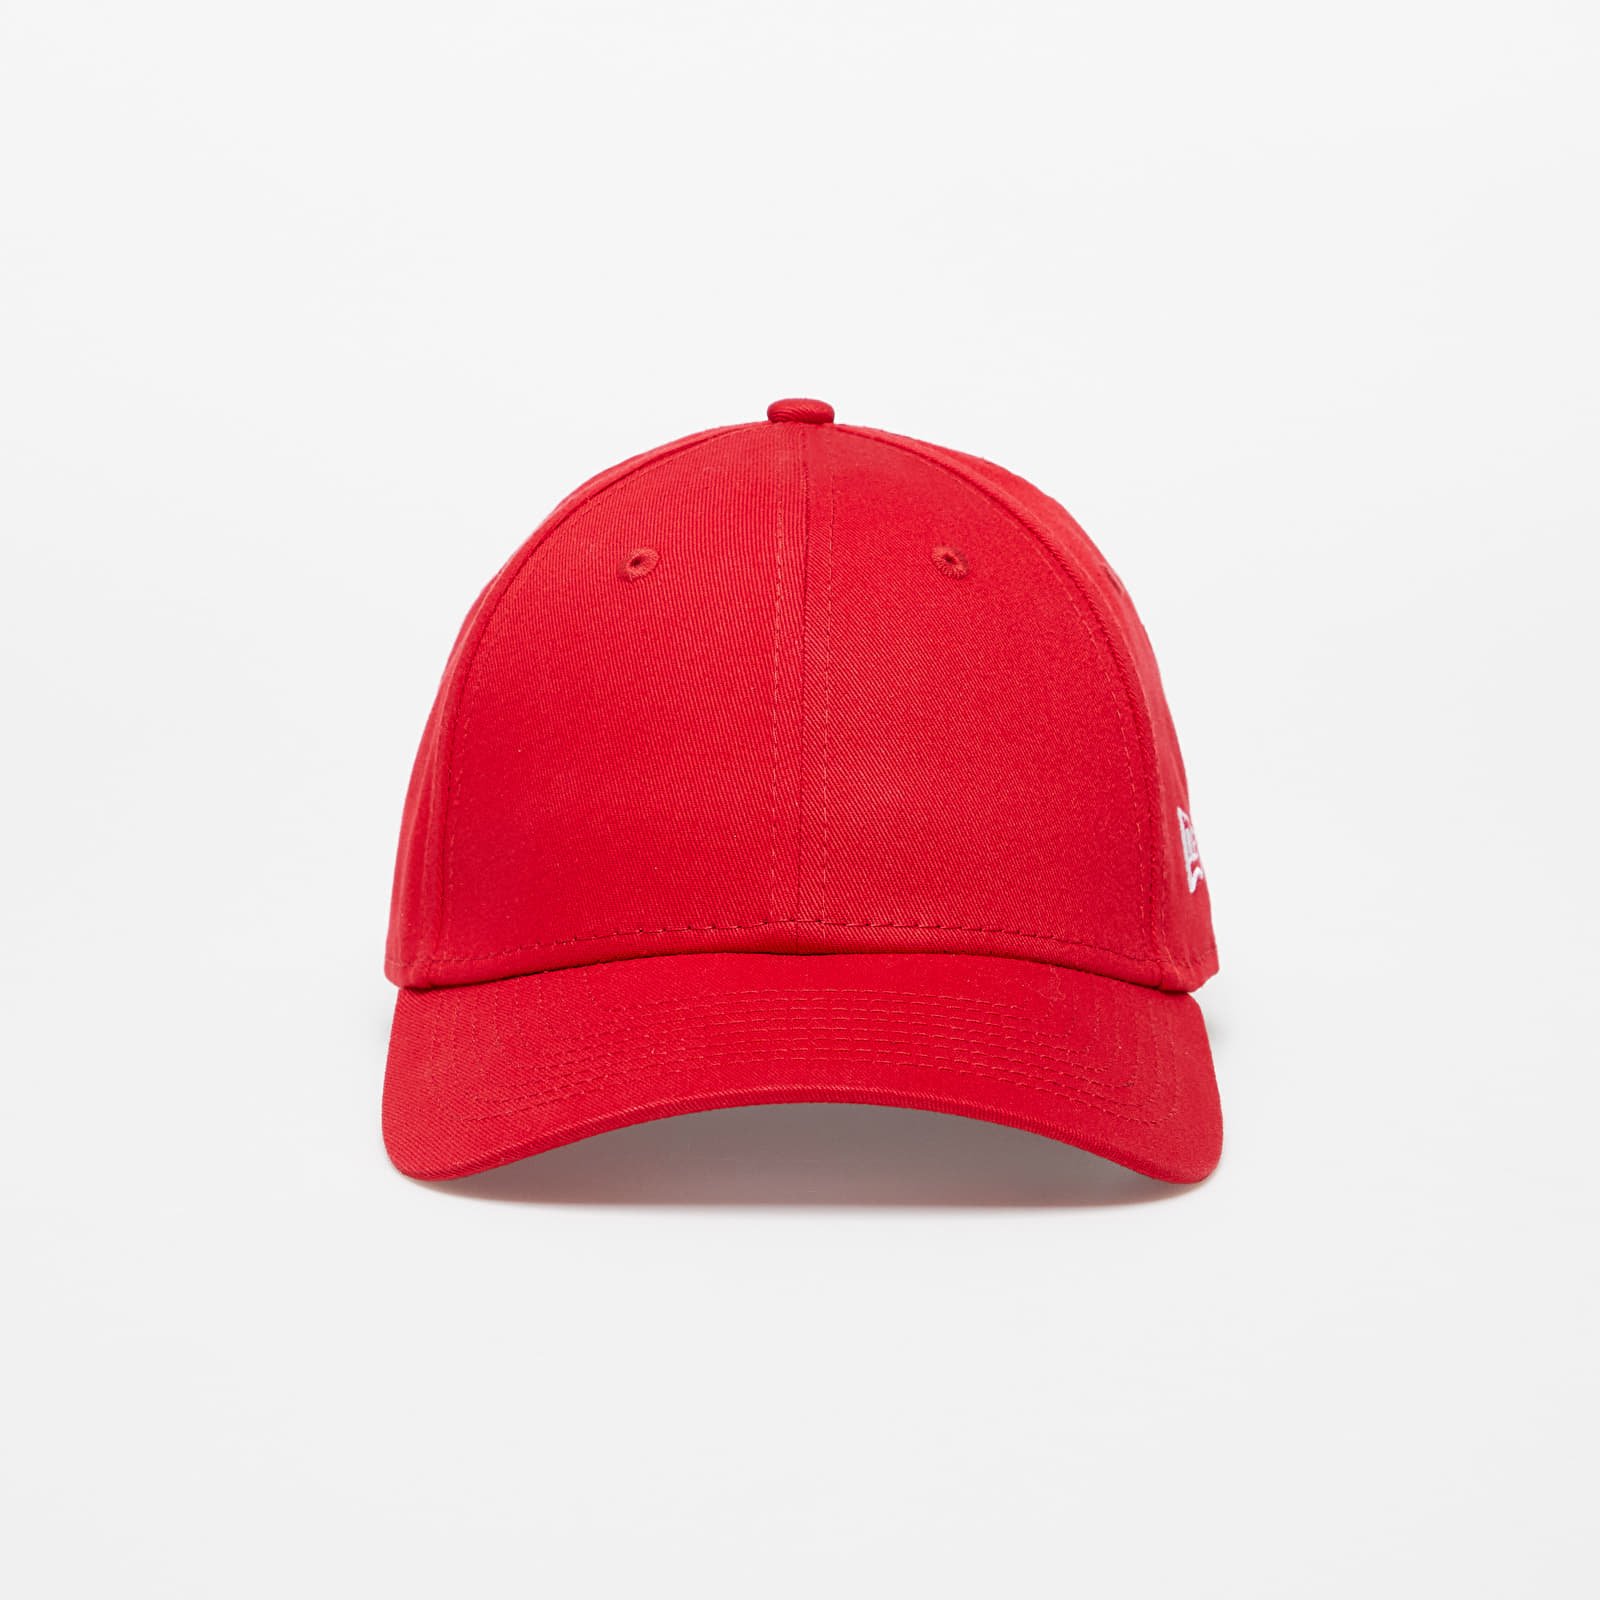 Caps New Era Cap 9Forty Flag Collection Scarlet/ White